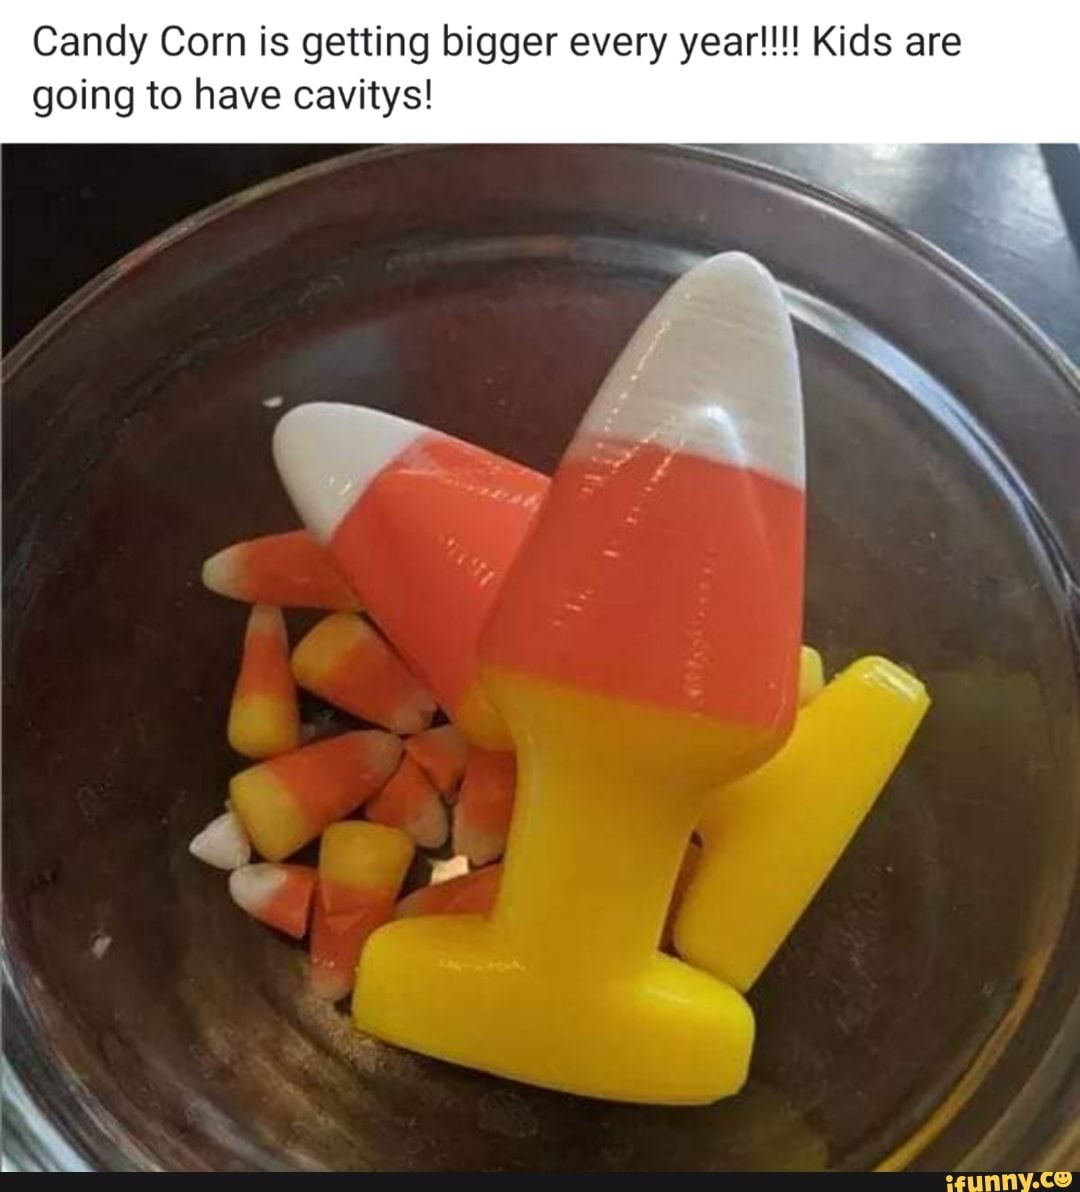 Candy Corn Meme
 Candy Corn is ting bigger every year Kids are going